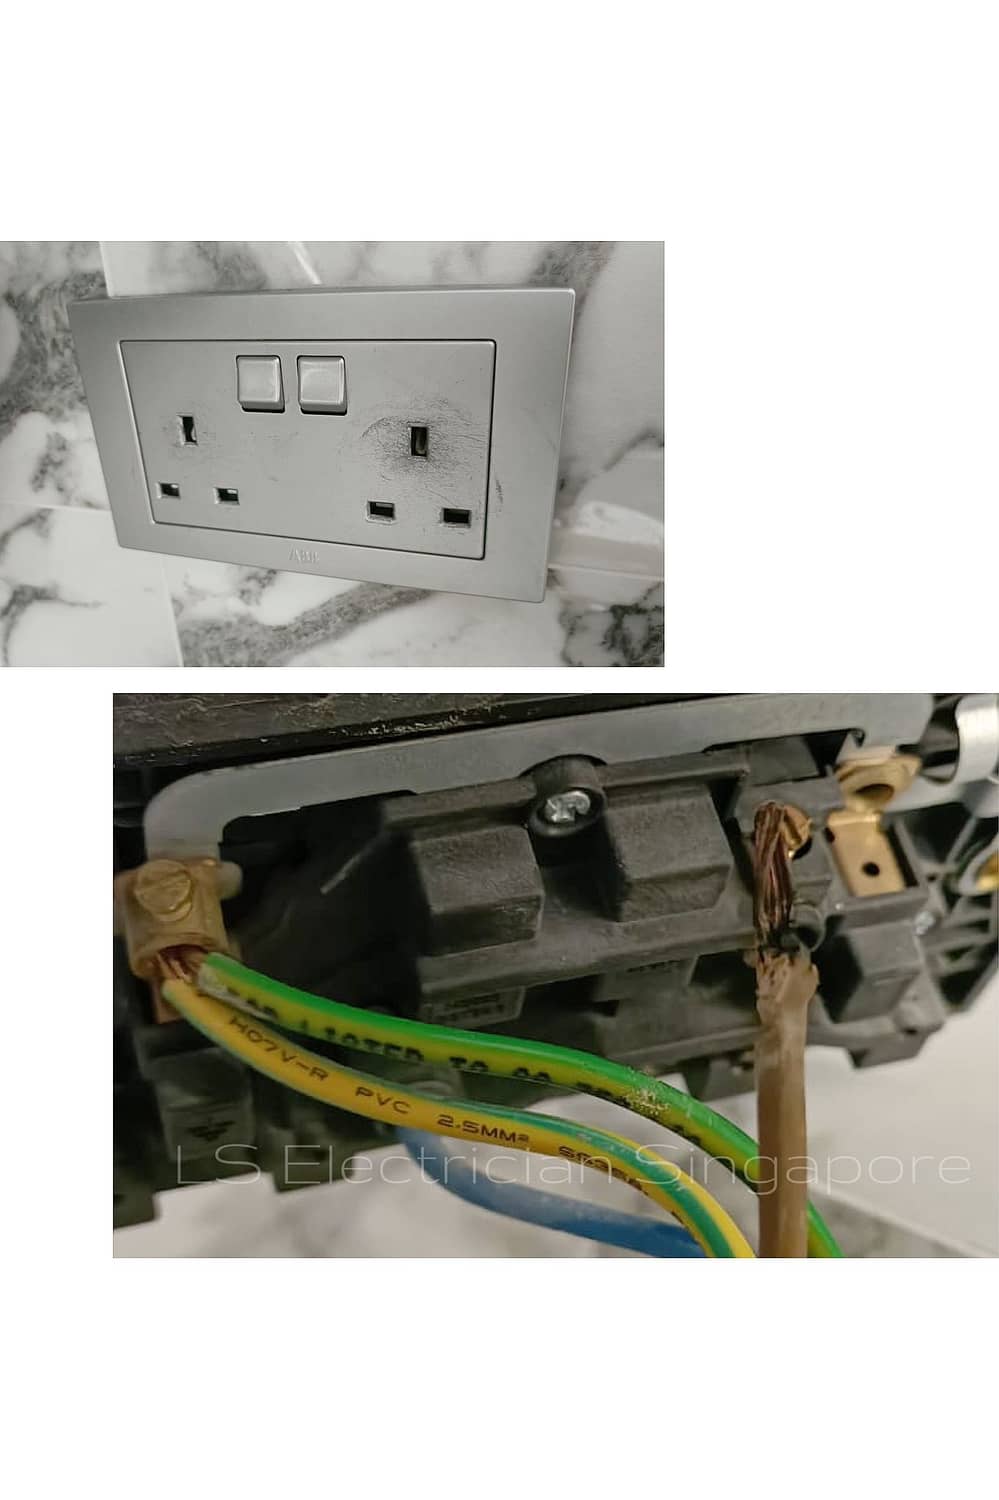 Troubleshooting 2x13A Power Socket